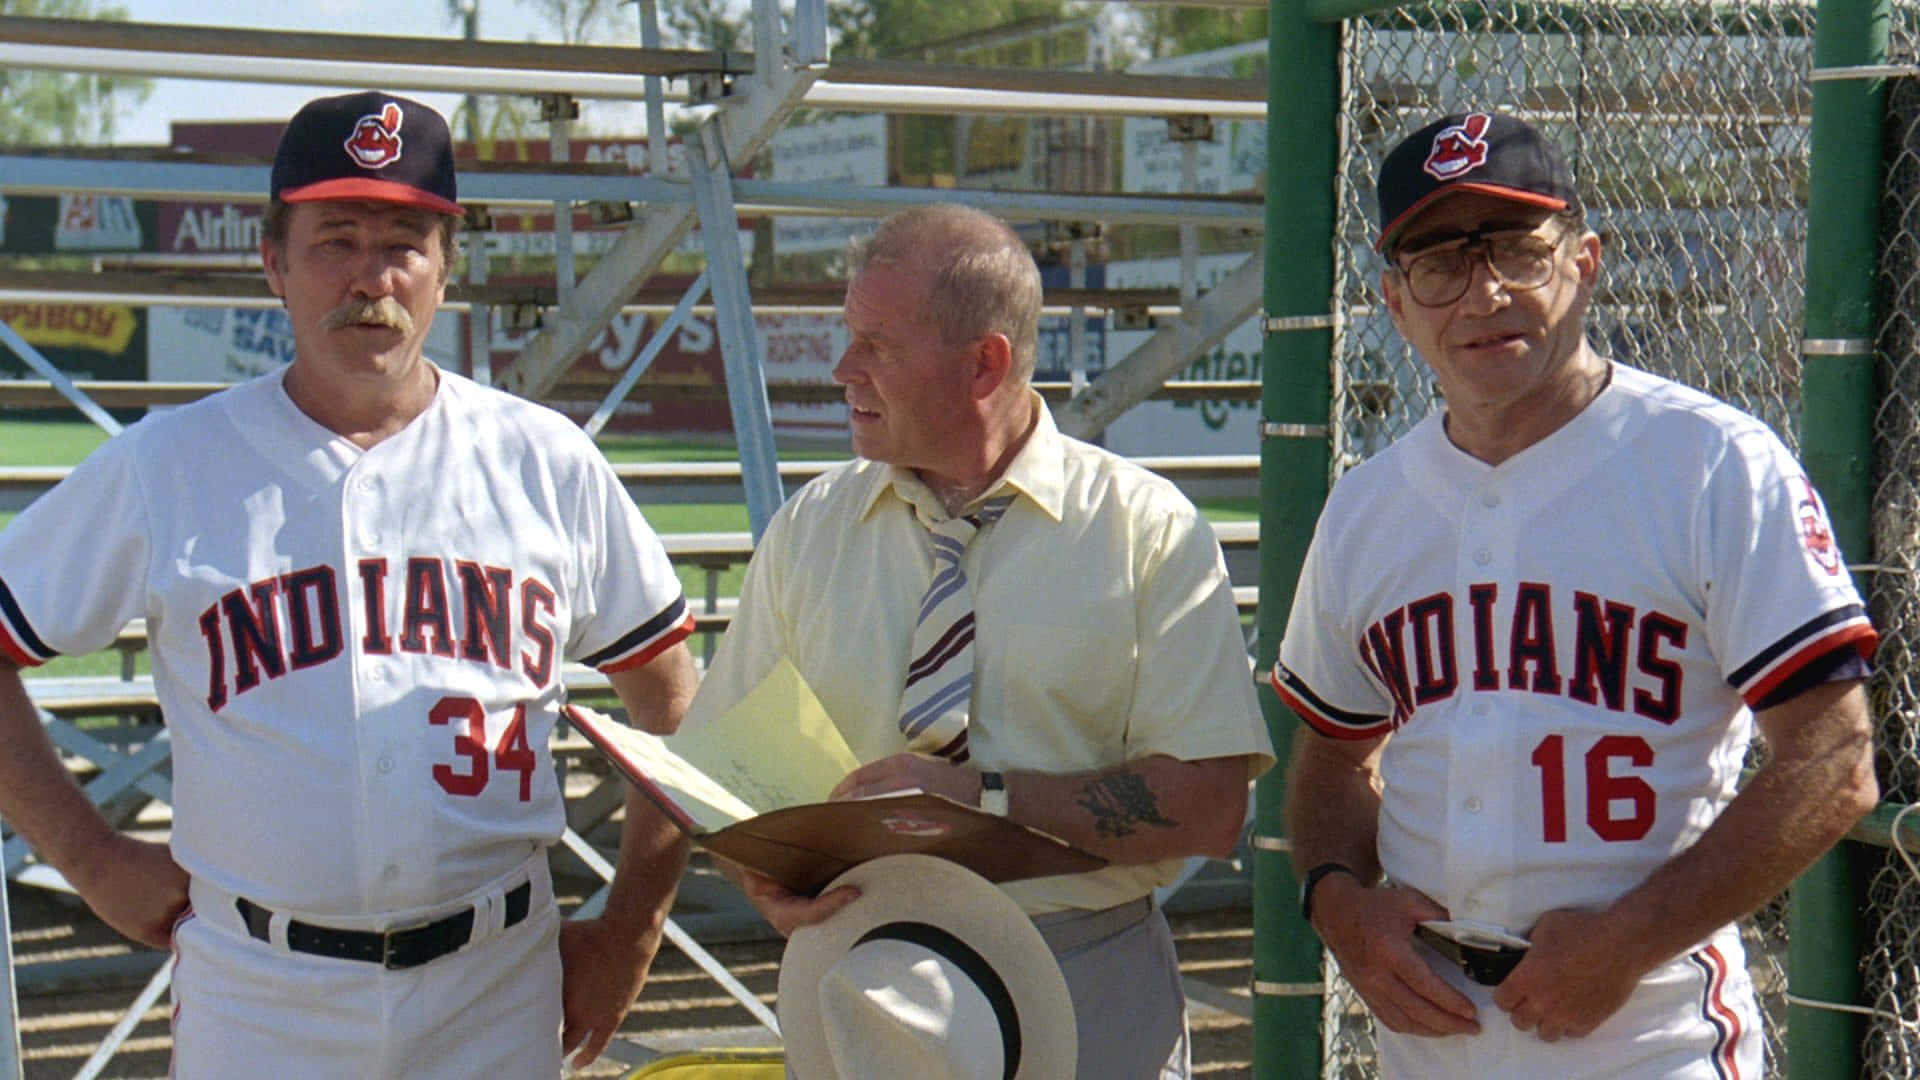 The Cast of Major League Movie on Field Wallpaper